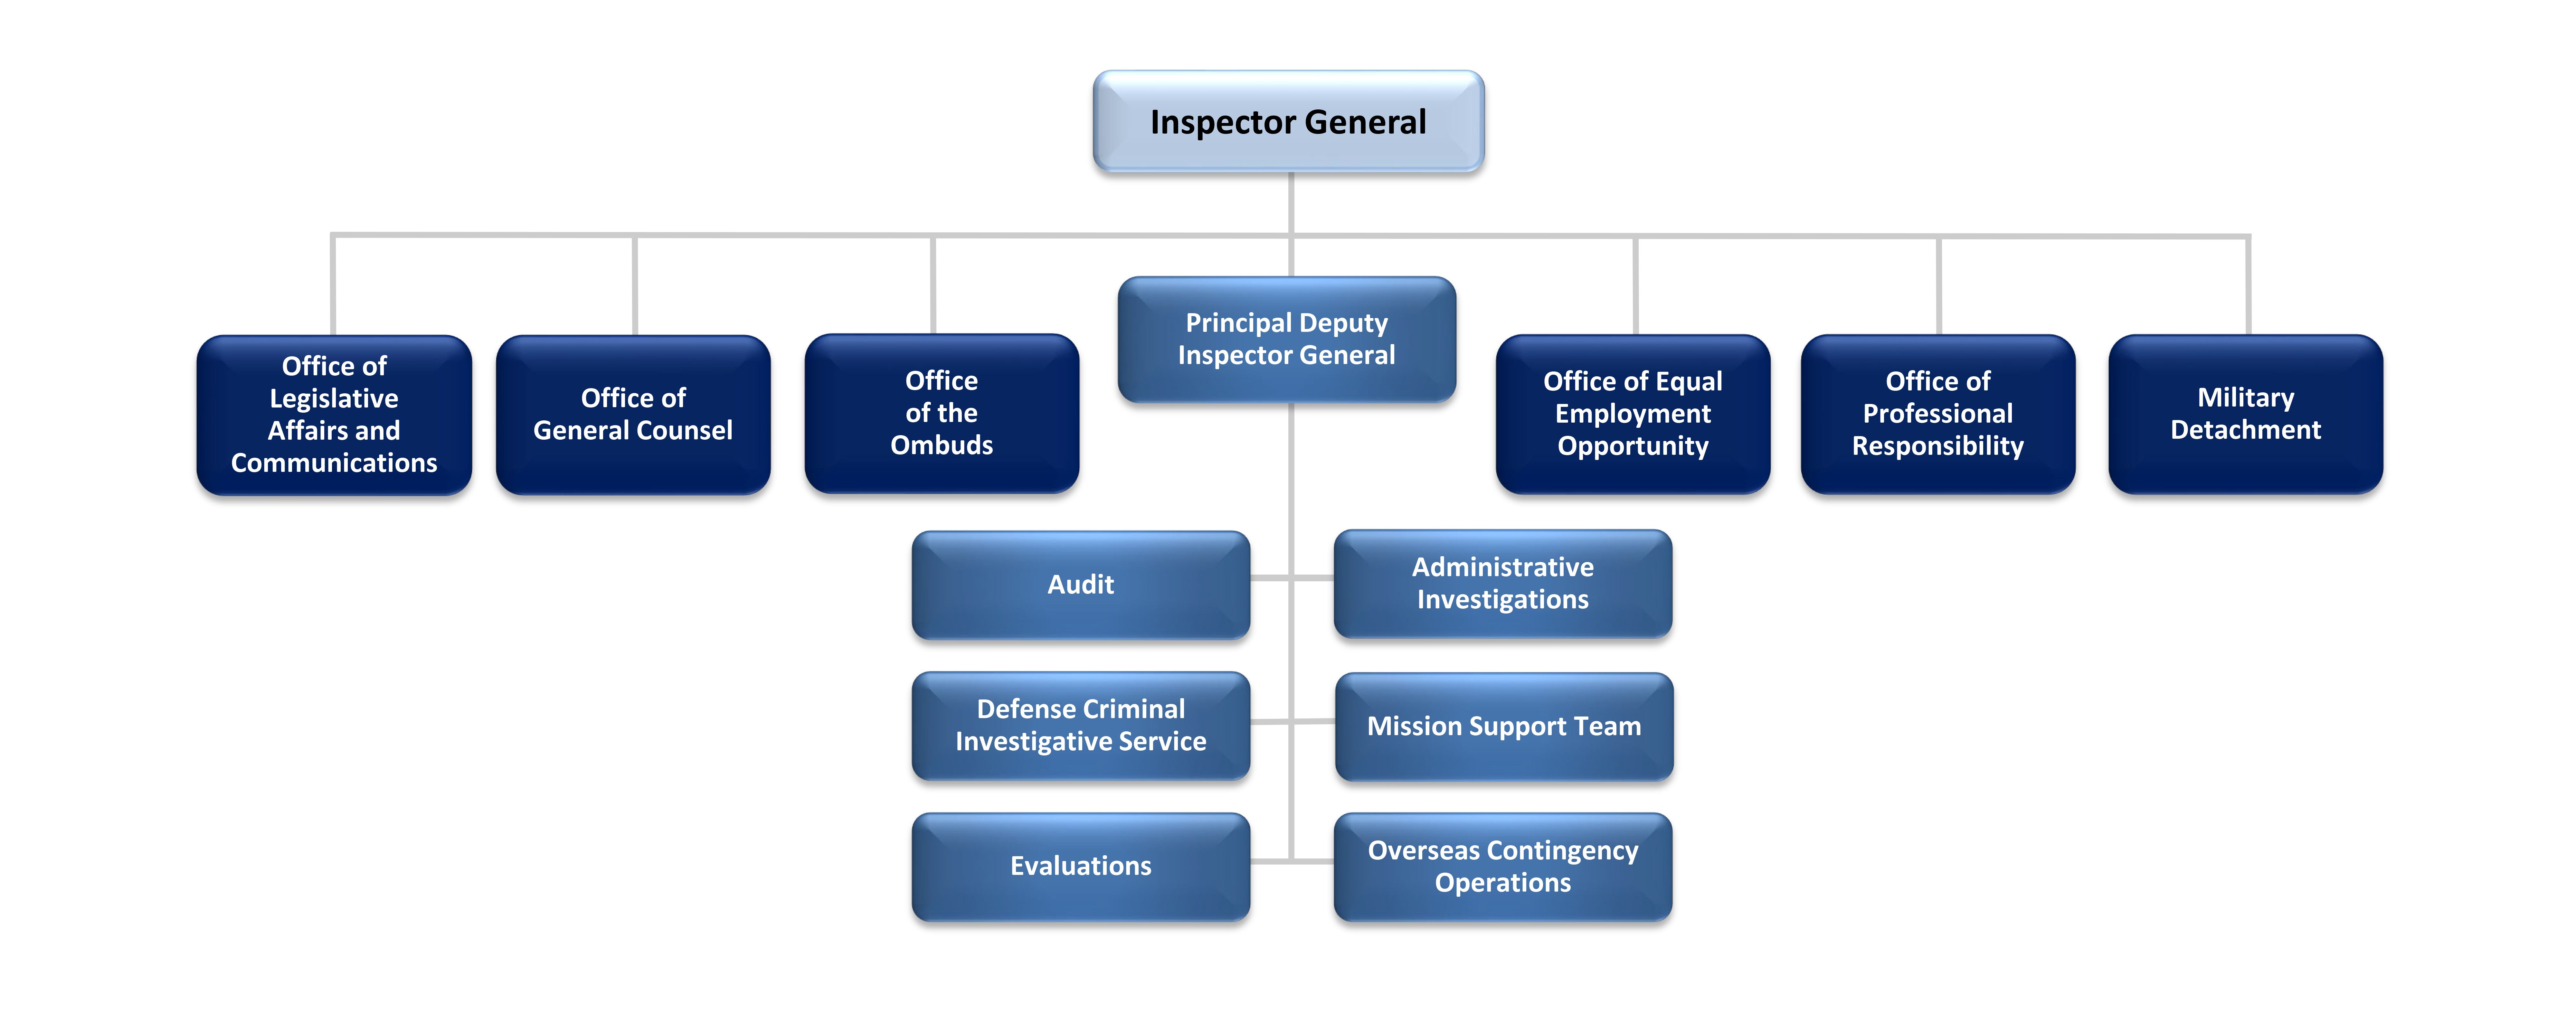 Inspector General Organizational Structure:  Inspector General,  Office of the Ombuds, EEO, Office of Professional Responsibility and Military Detachment, Principal Deputy Inspector General: Audit, Administrative Investigations, Defense Criminal Investigative Service, Diversity and Inclusion and Extremism in the Military, Evaluations, Overseas contingency Operations, Mission Support Team